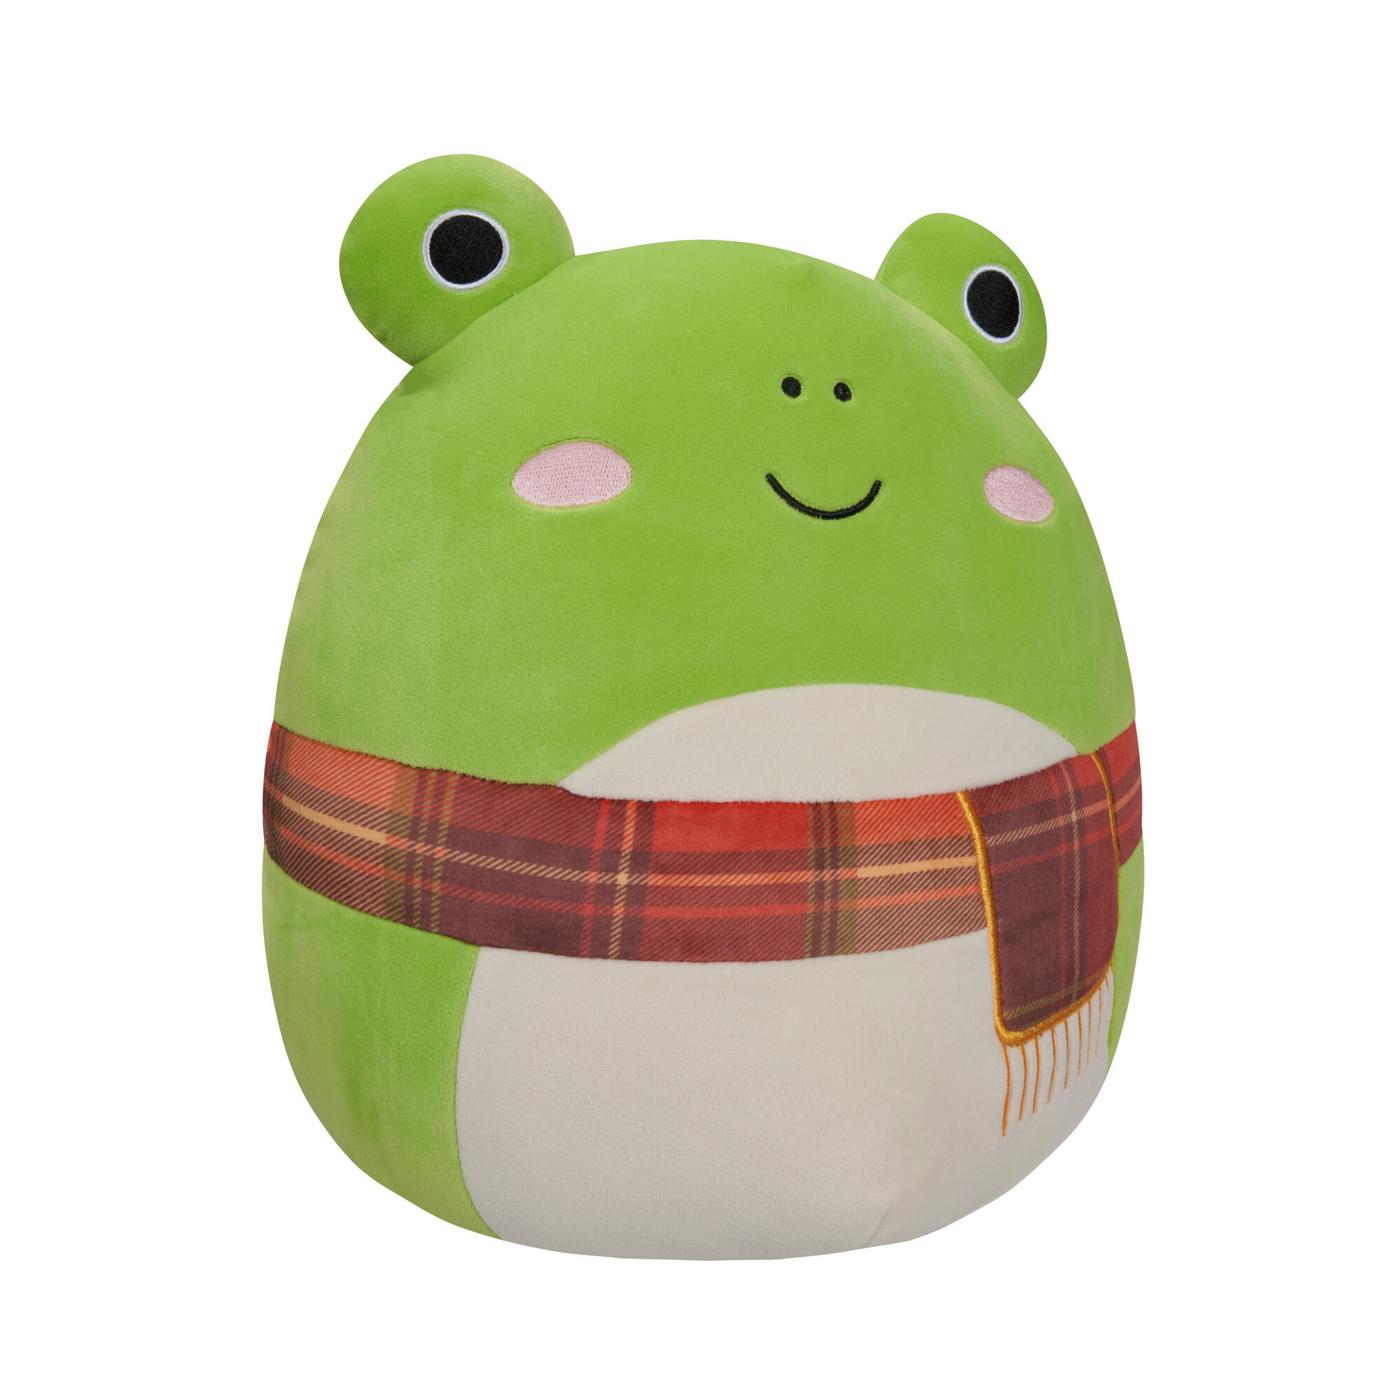 Squishmallows Frog Plush with Scarf - Green - Shop Plush Toys at H-E-B